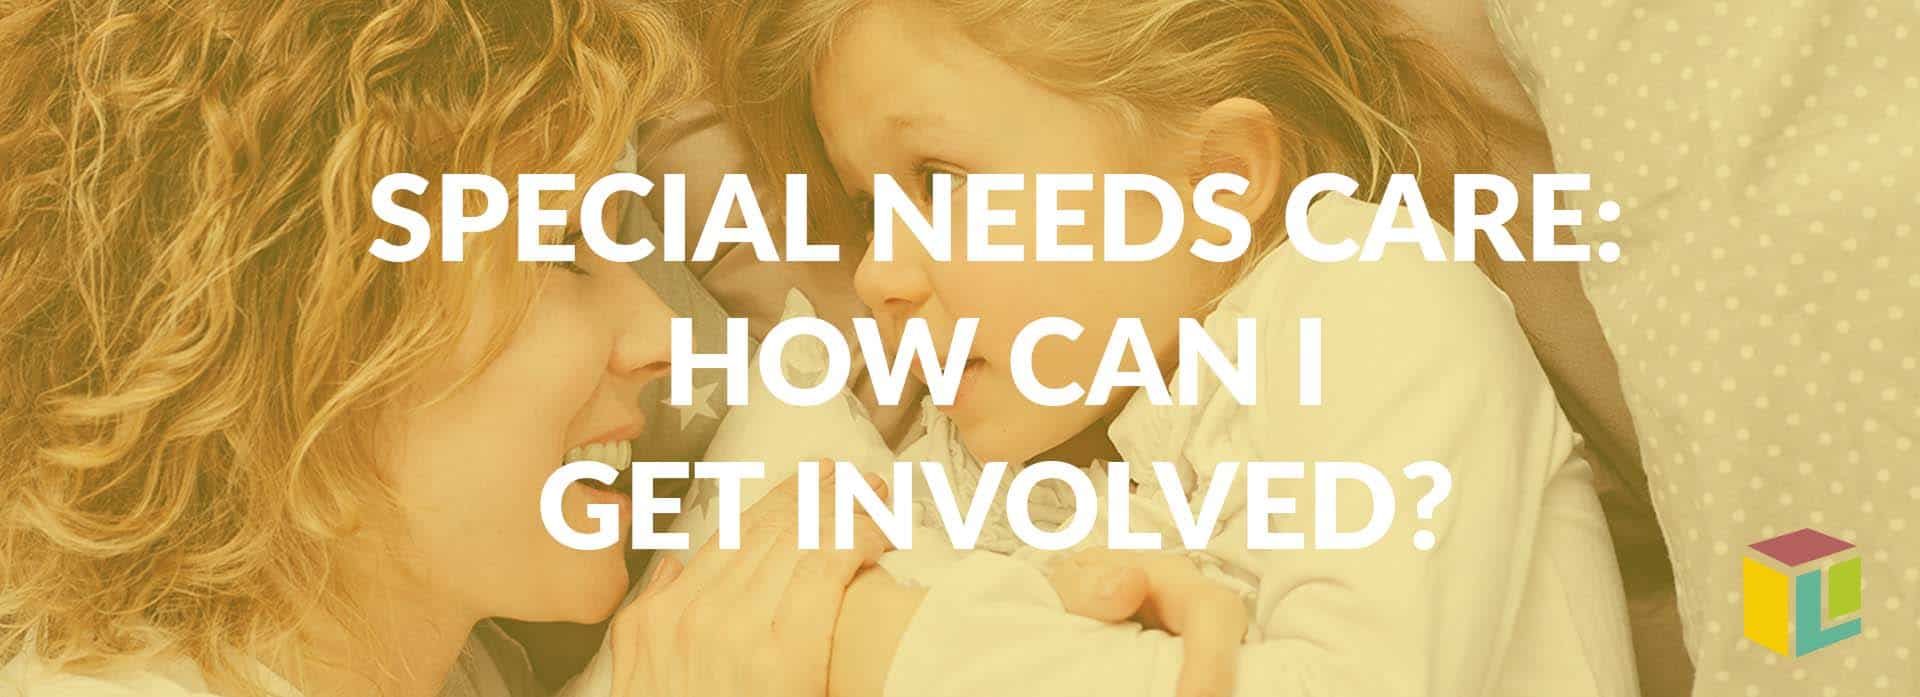 Special-Needs-Care-How-Can-I-Get-Involved Special-Needs-Care-How-Can-I-Get-Involved Special-Needs-Care-How-Can-I-Get-Involved Special-Needs-Care-How-Can-I-Get-Involved